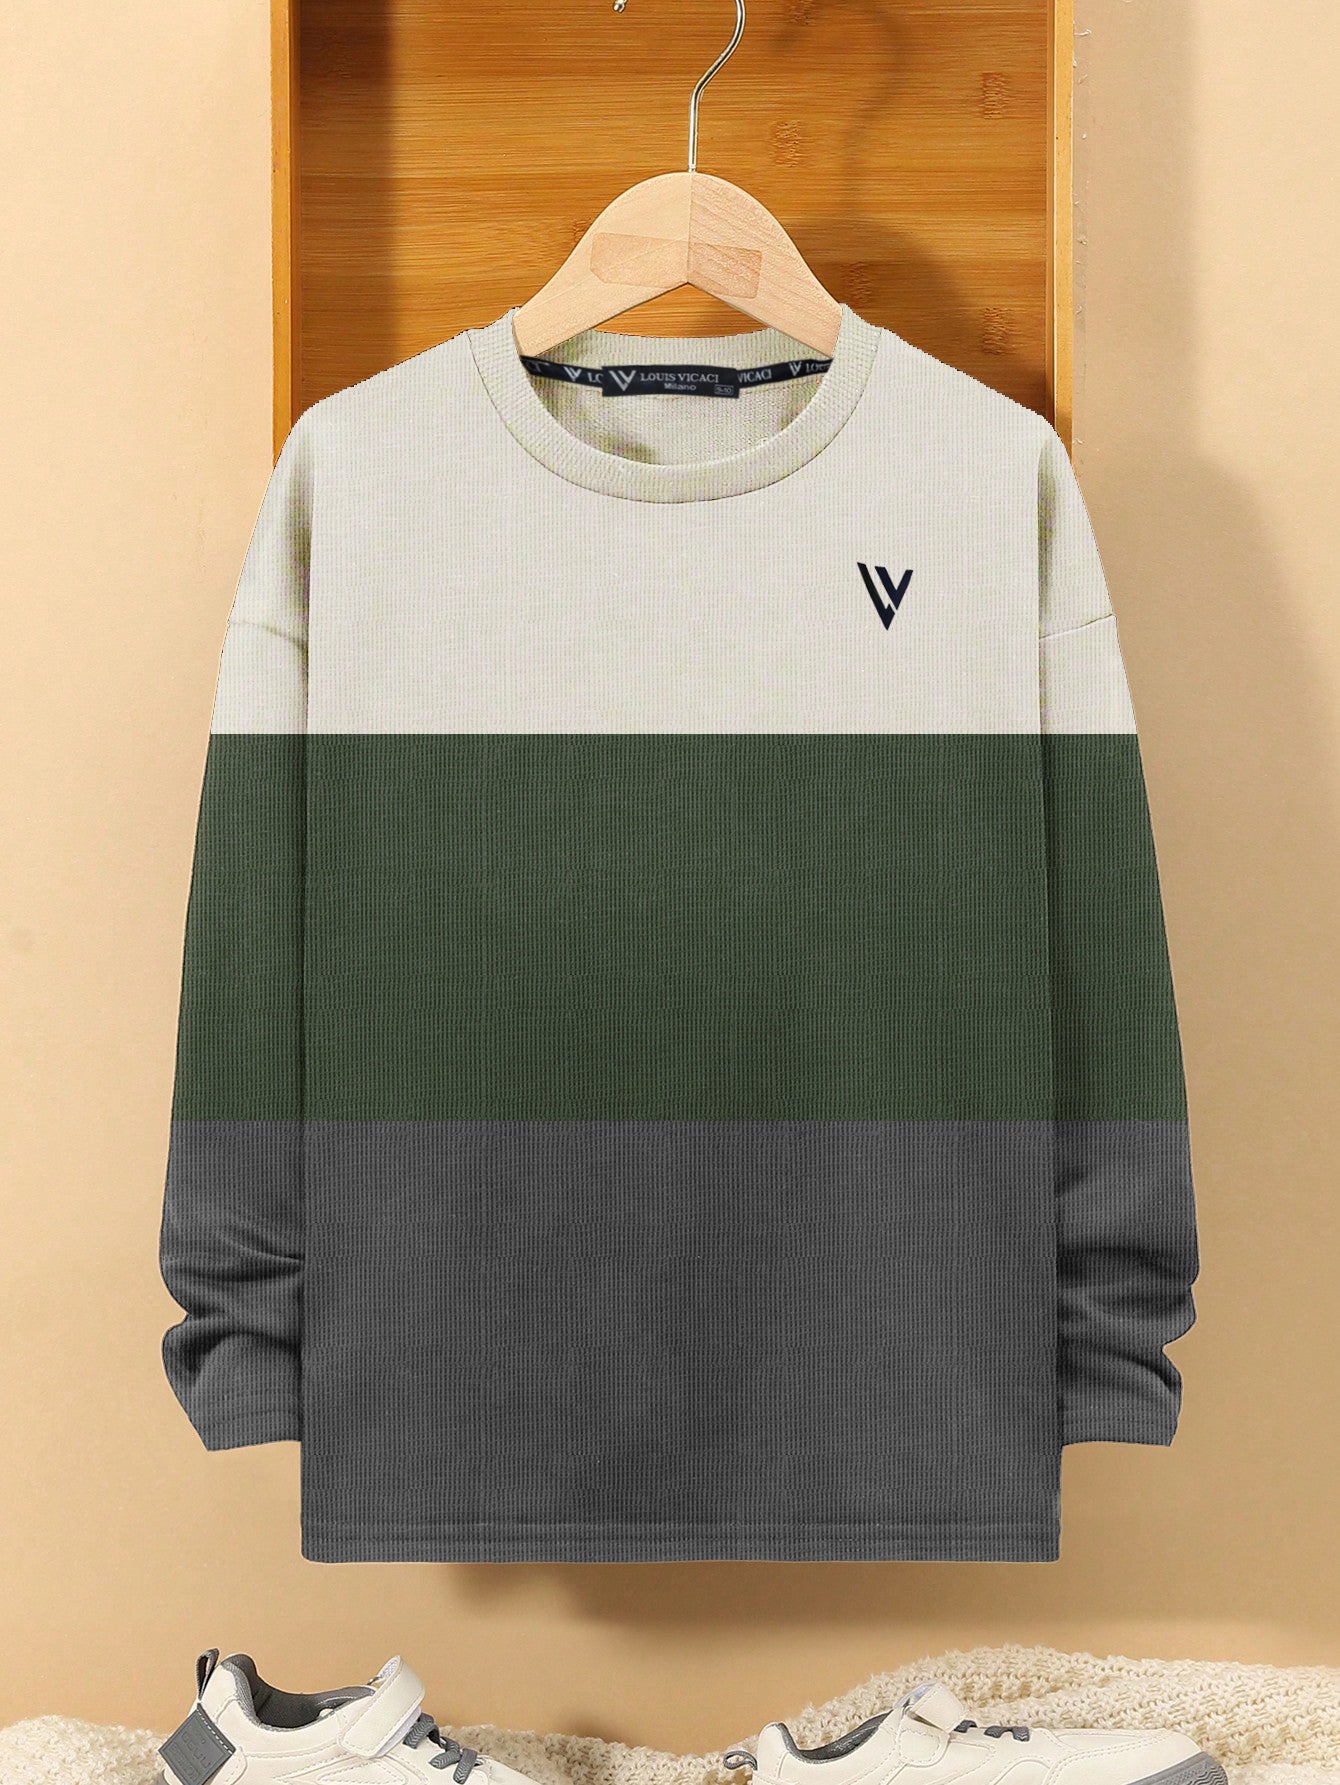 LV Crew Neck Long Sleeve Thermal Tee Shirt For Kids-Off White with Green & Grey-SP1716/RT2420